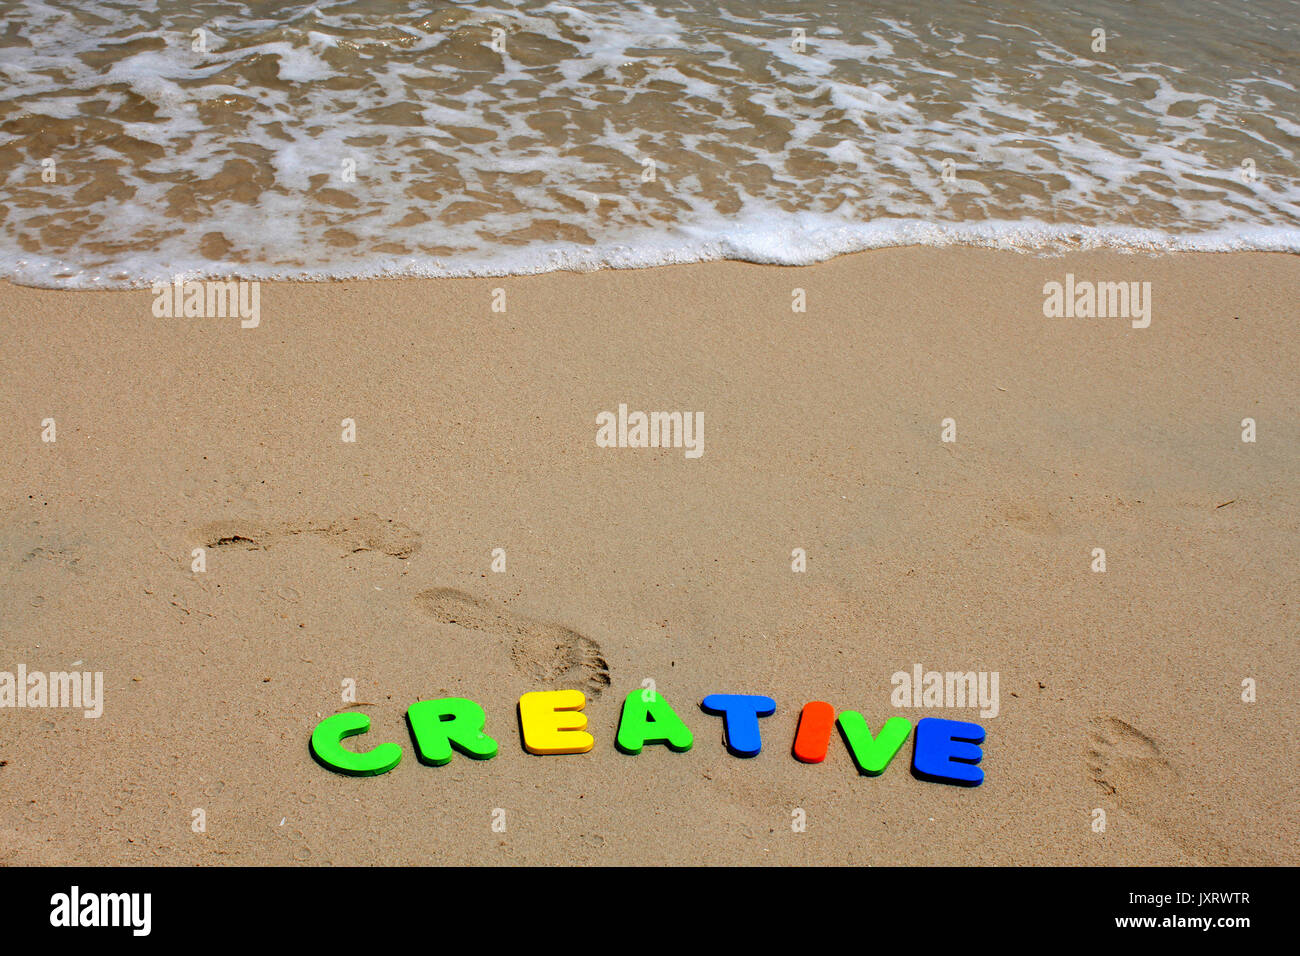 Creative text written with plastics letters colours. Stock Photo